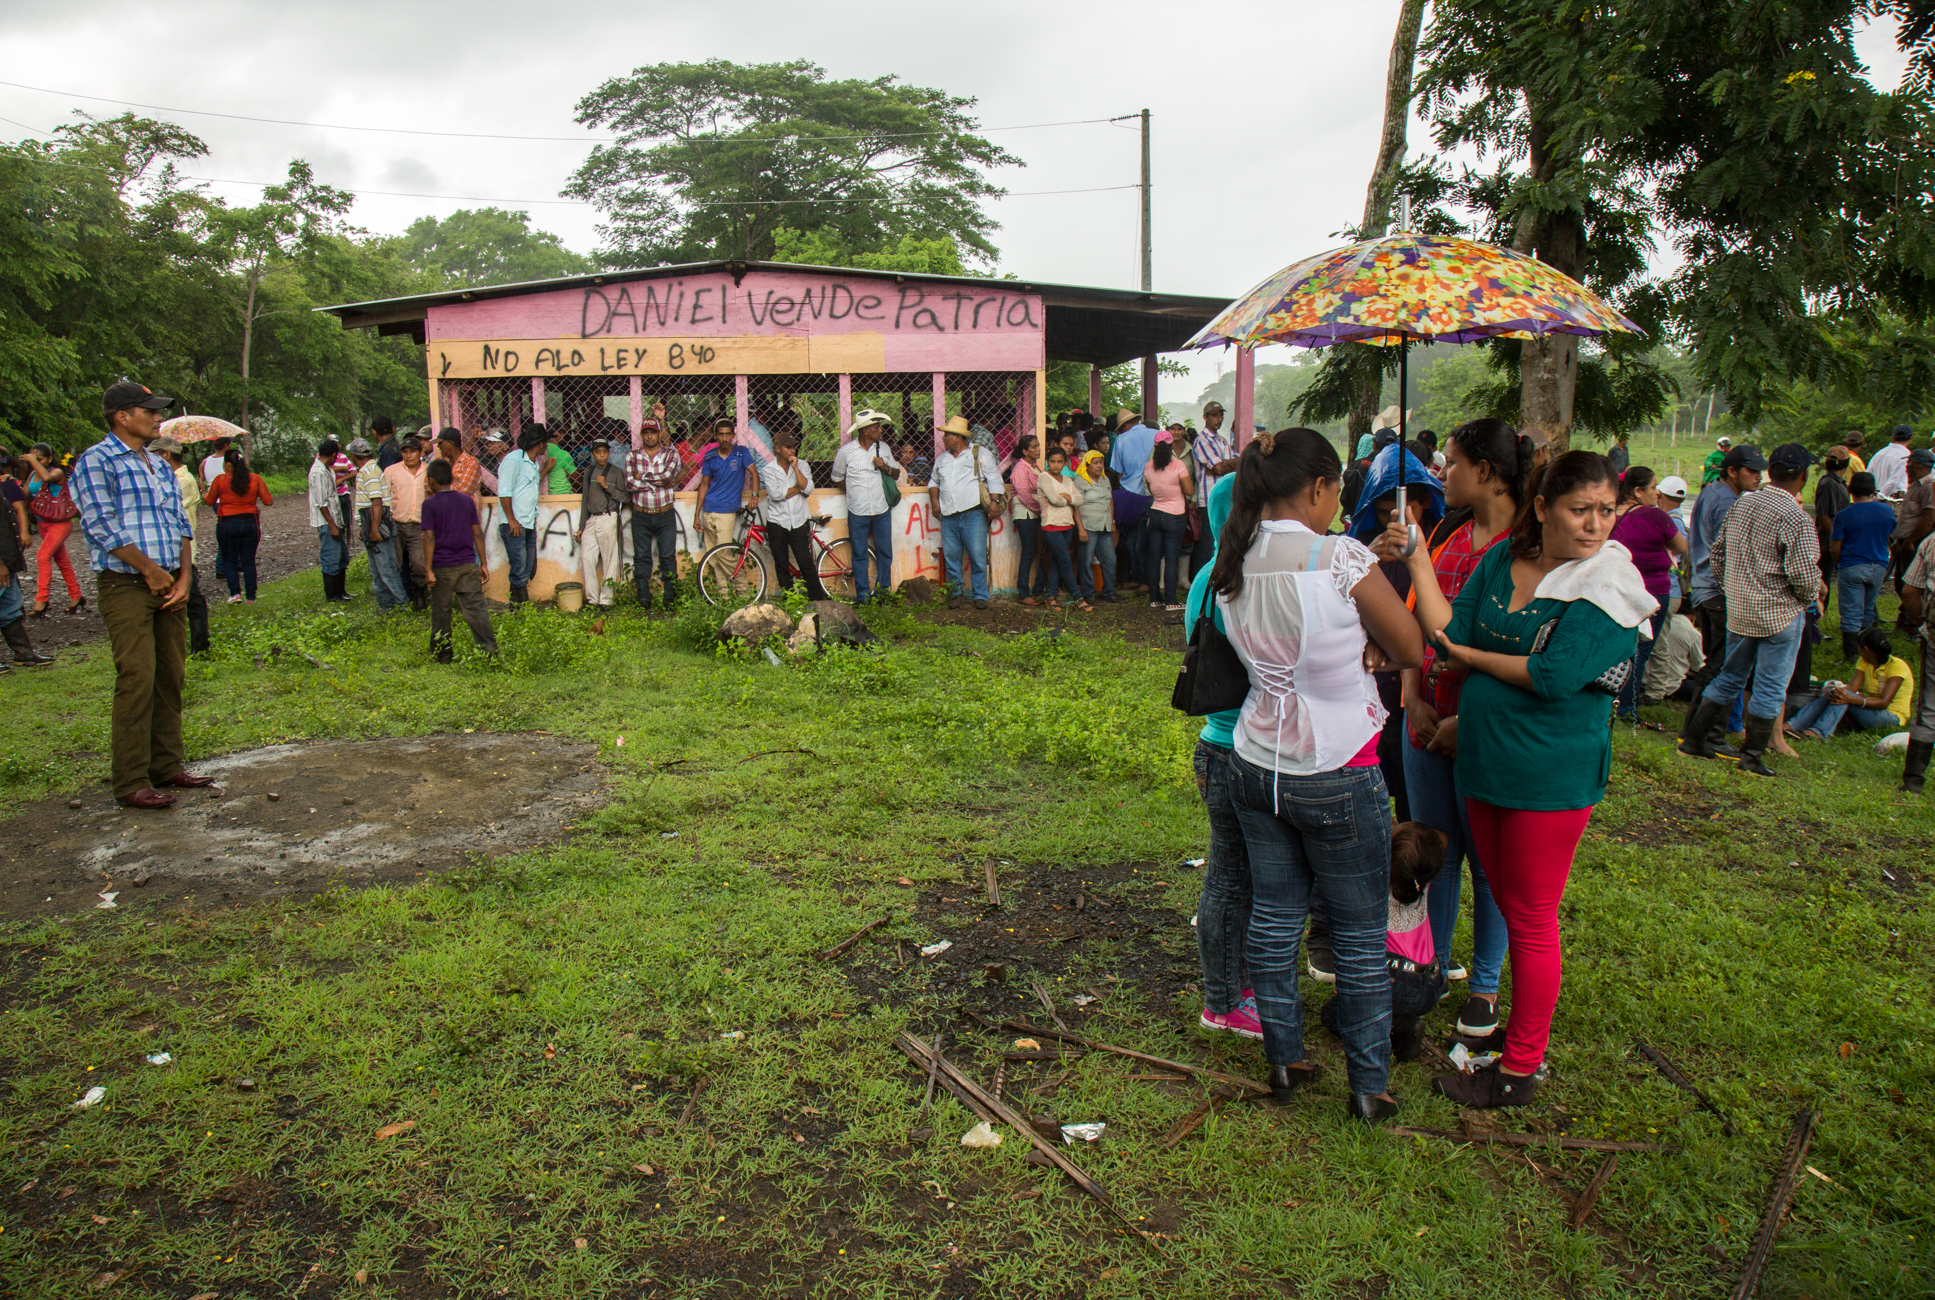  Trying to keep dry, crowds huddle under umbrellas and a small structure which has been spray painted "No Canal, No Law 840" and "Daniel Ortega sells our country" at a protest against the Ley 840 and the Nicaraguan Canal project which could expropria